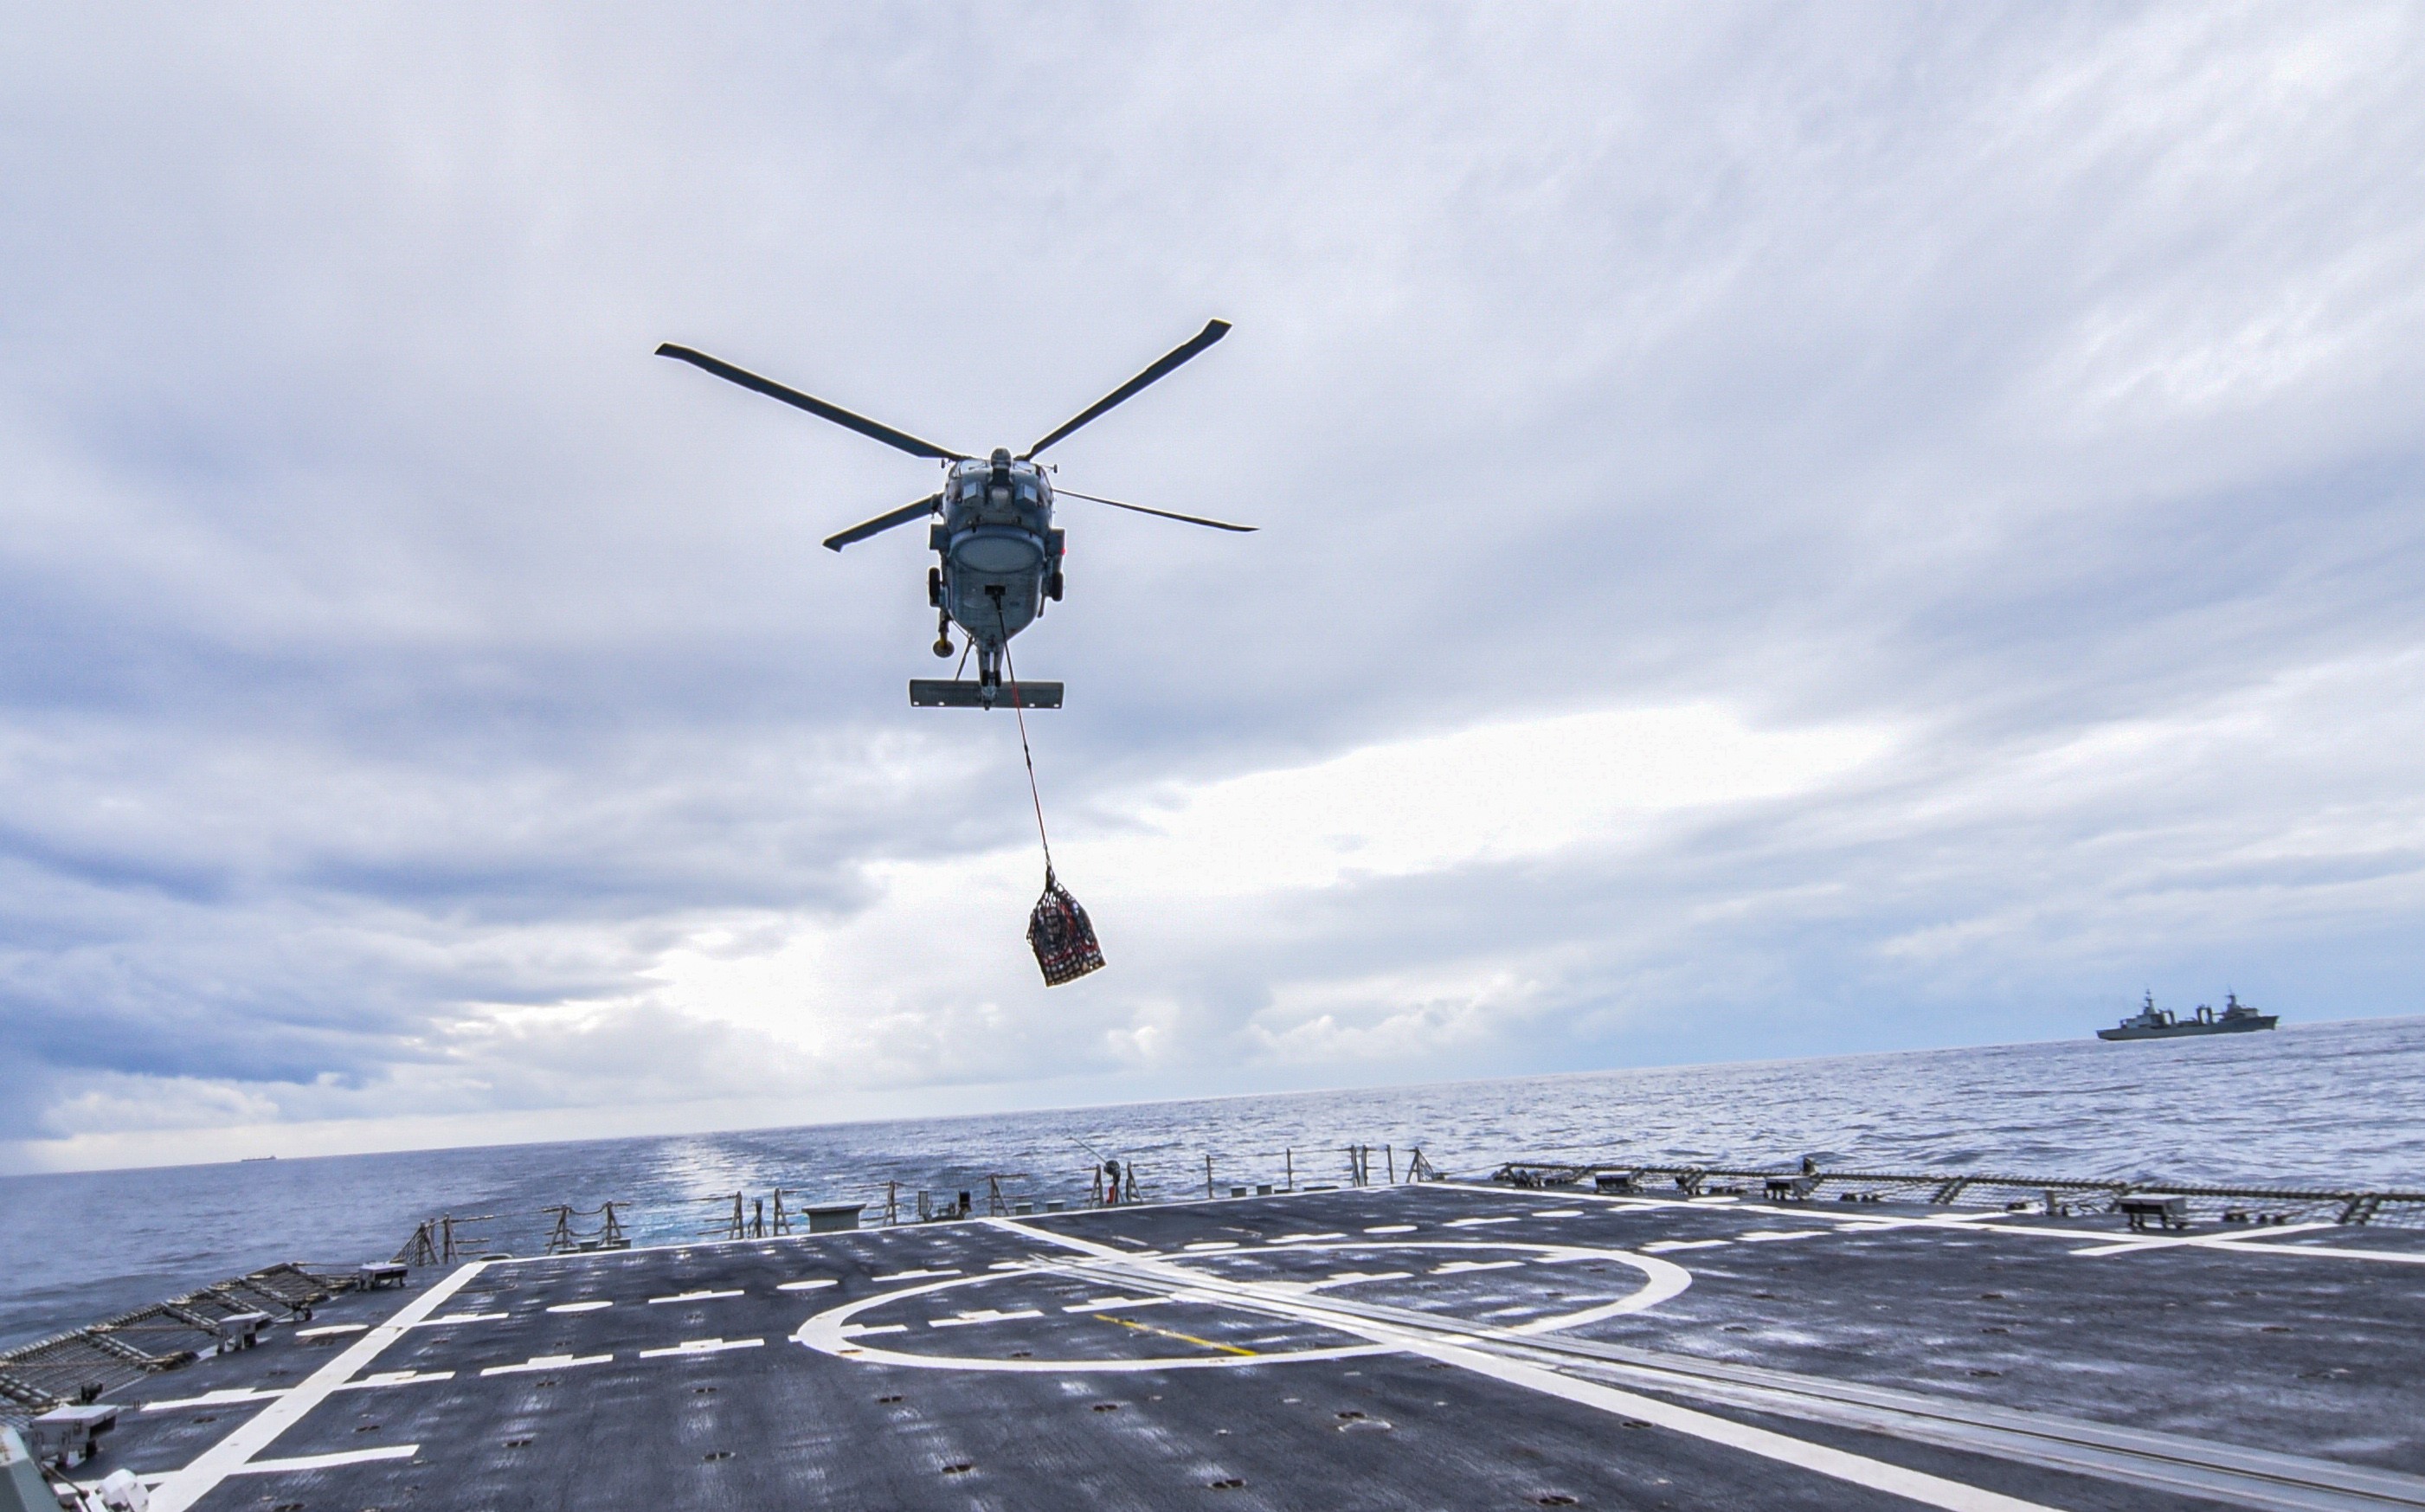 Toro SH60-B Helicopter performing a vertical supply operation.